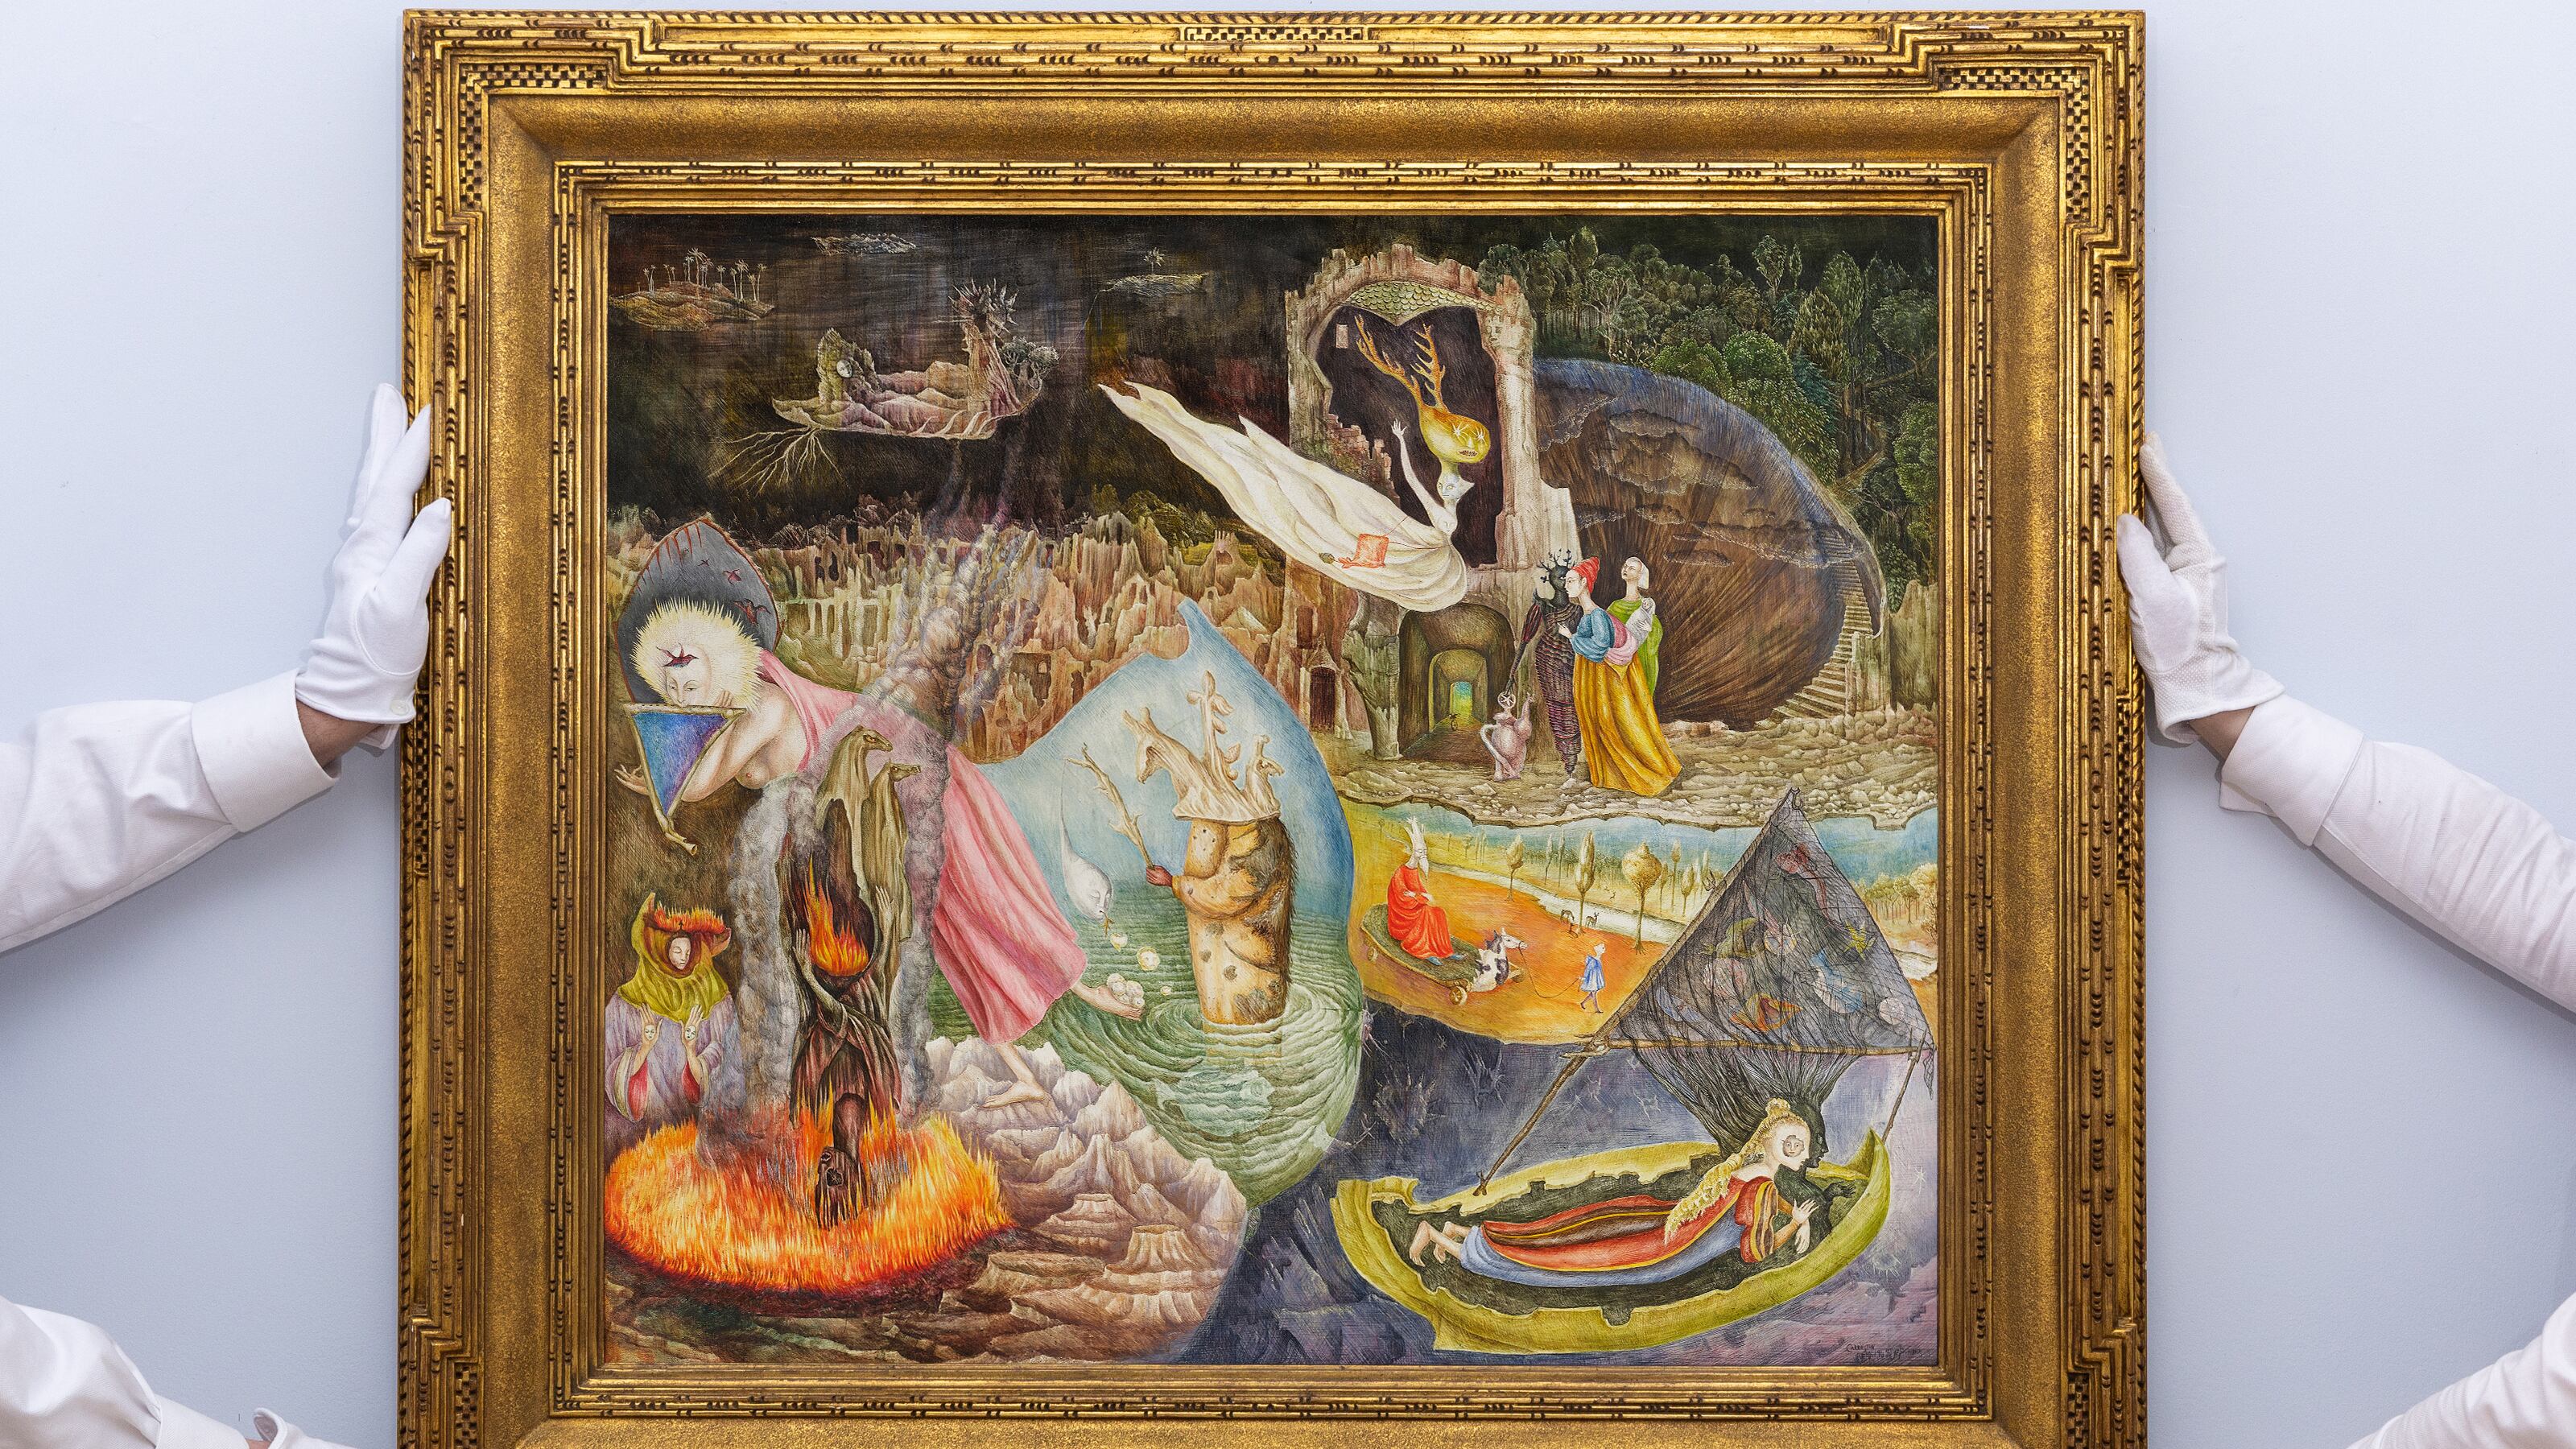 Les Distractions de Dagobert by Leonora Carrington has sold for more than £22m